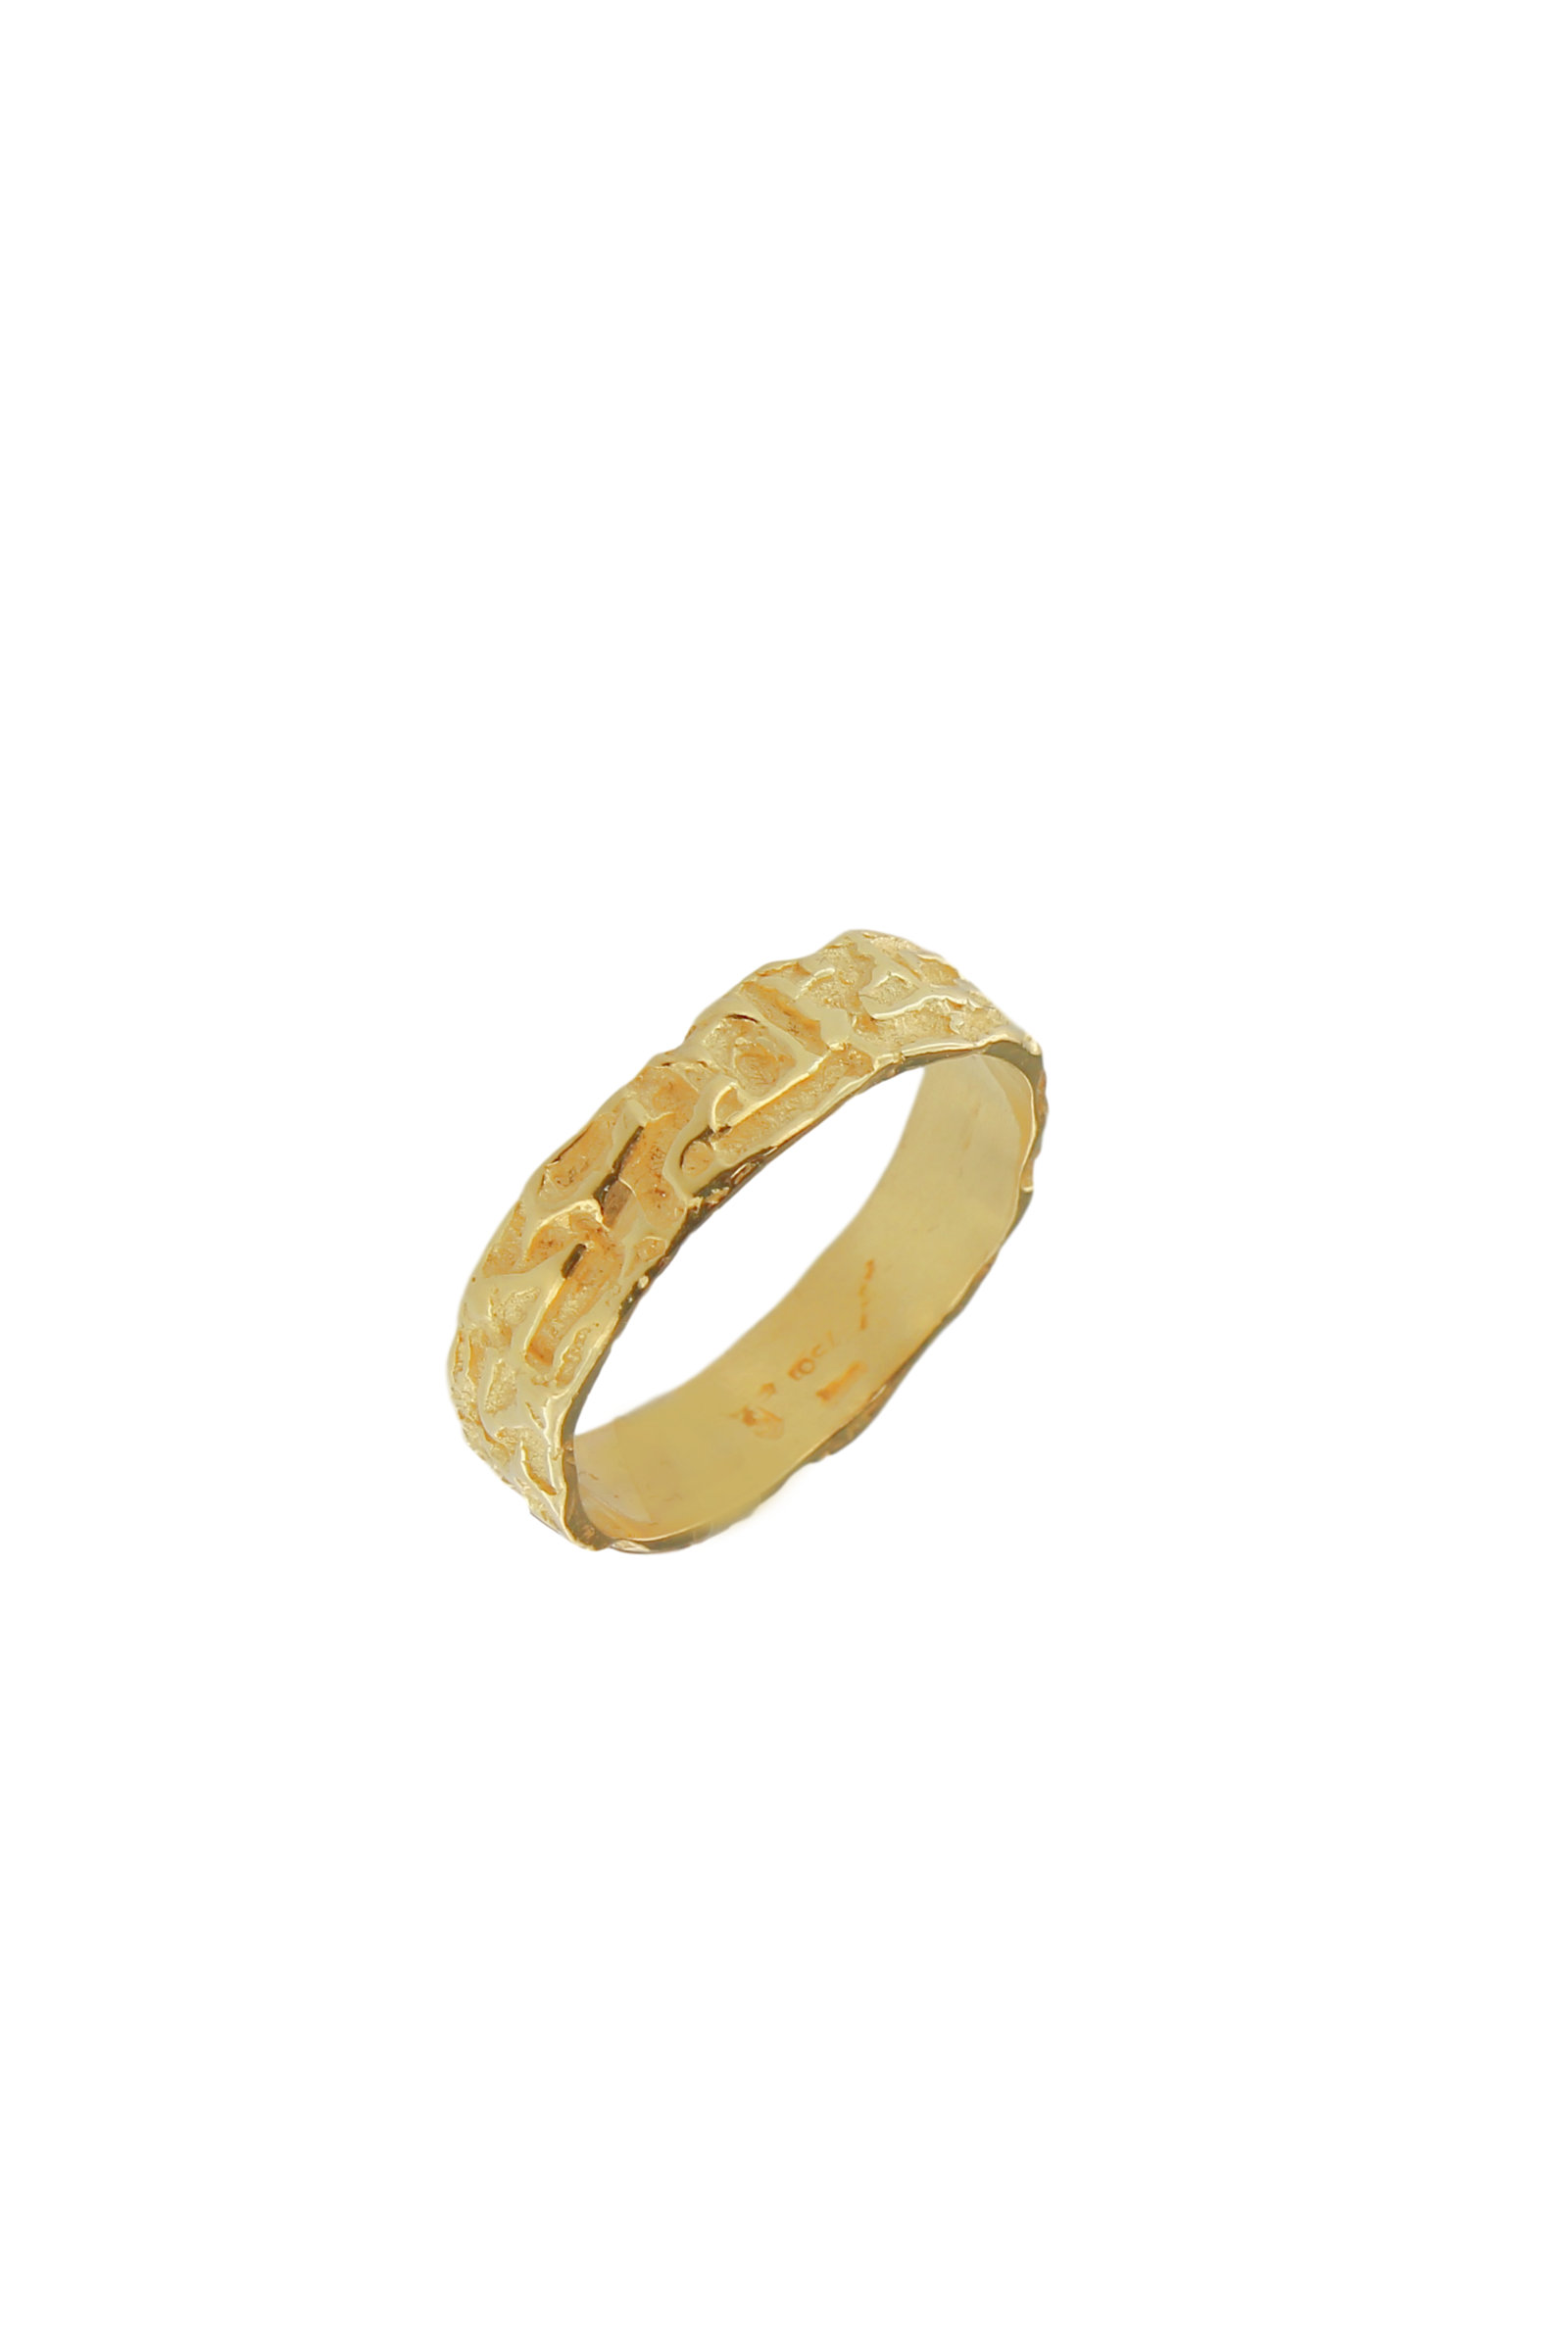 SE92A-18-Kt-Yellow-Gold-Band-Ring-1